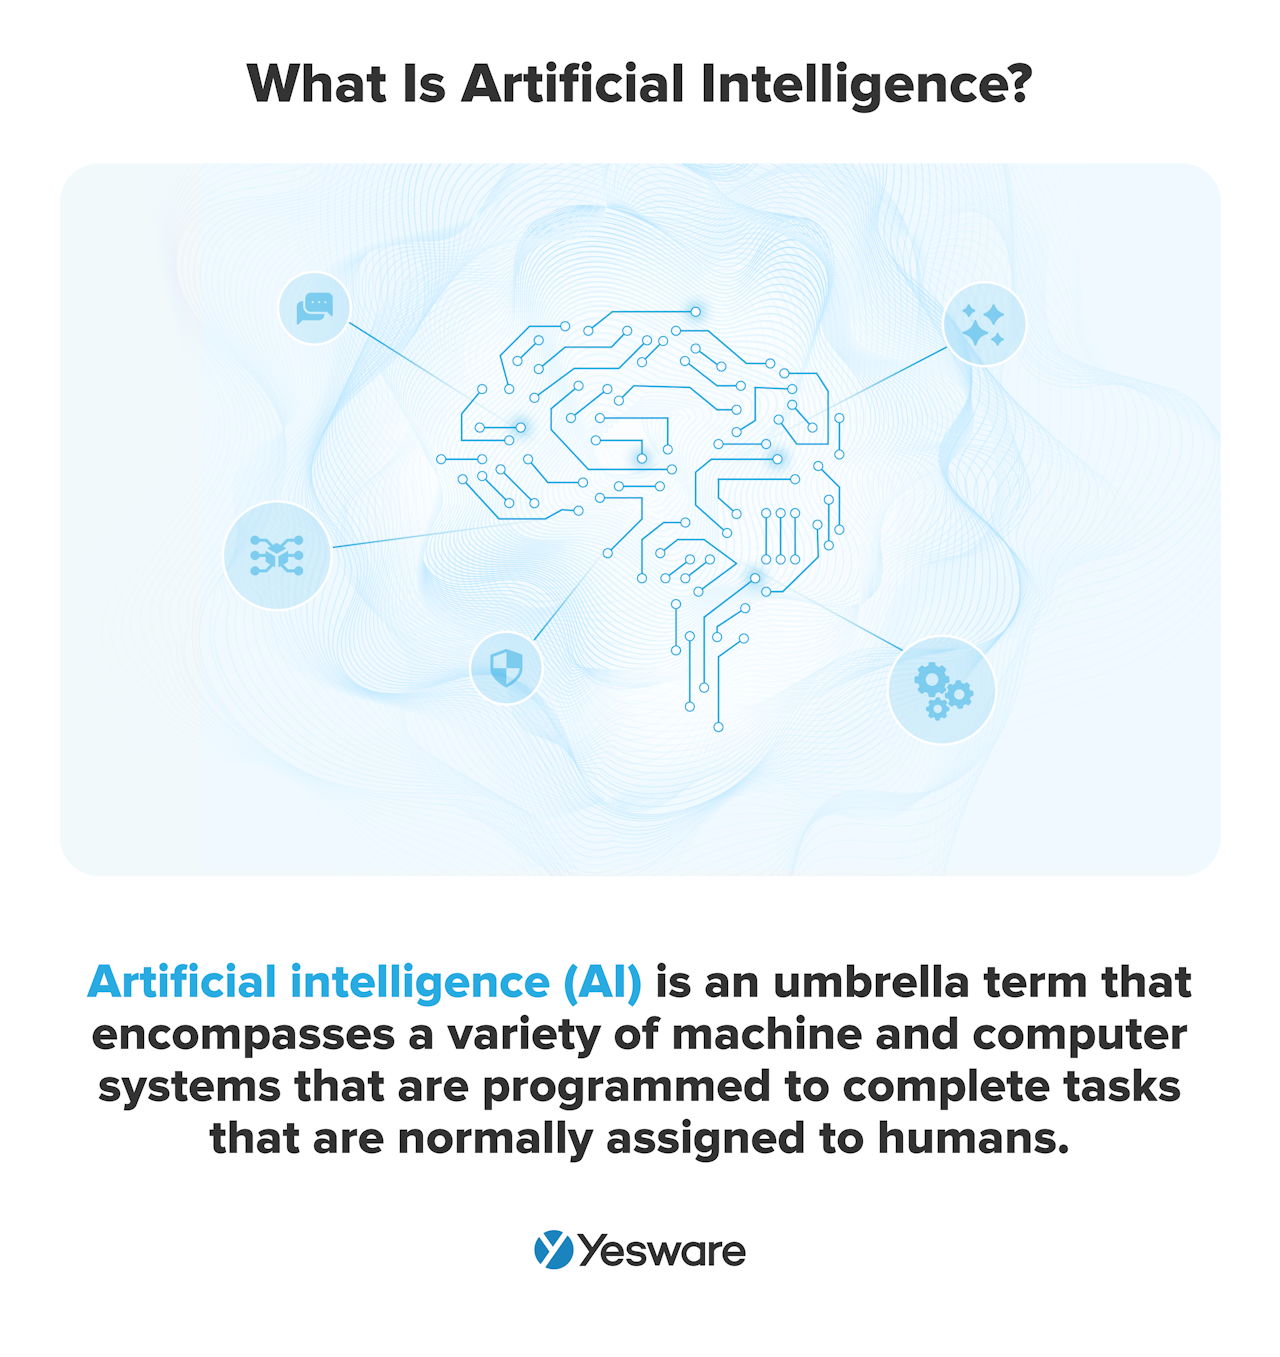 What Is Artificial Intelligence (AI)?